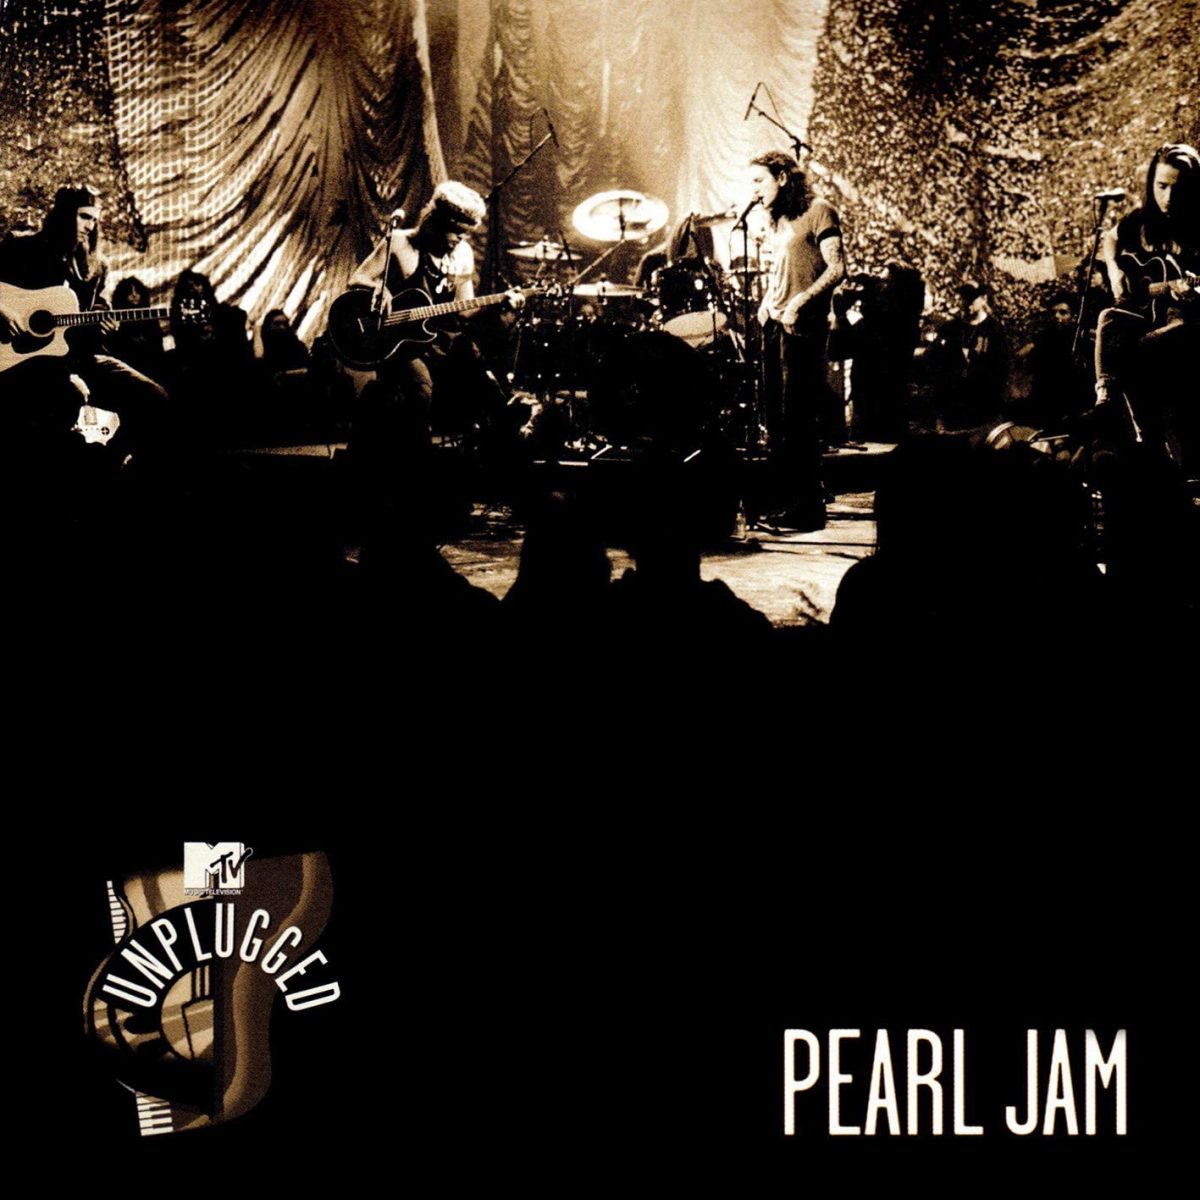 pearl jam mtv unplugged dvd download